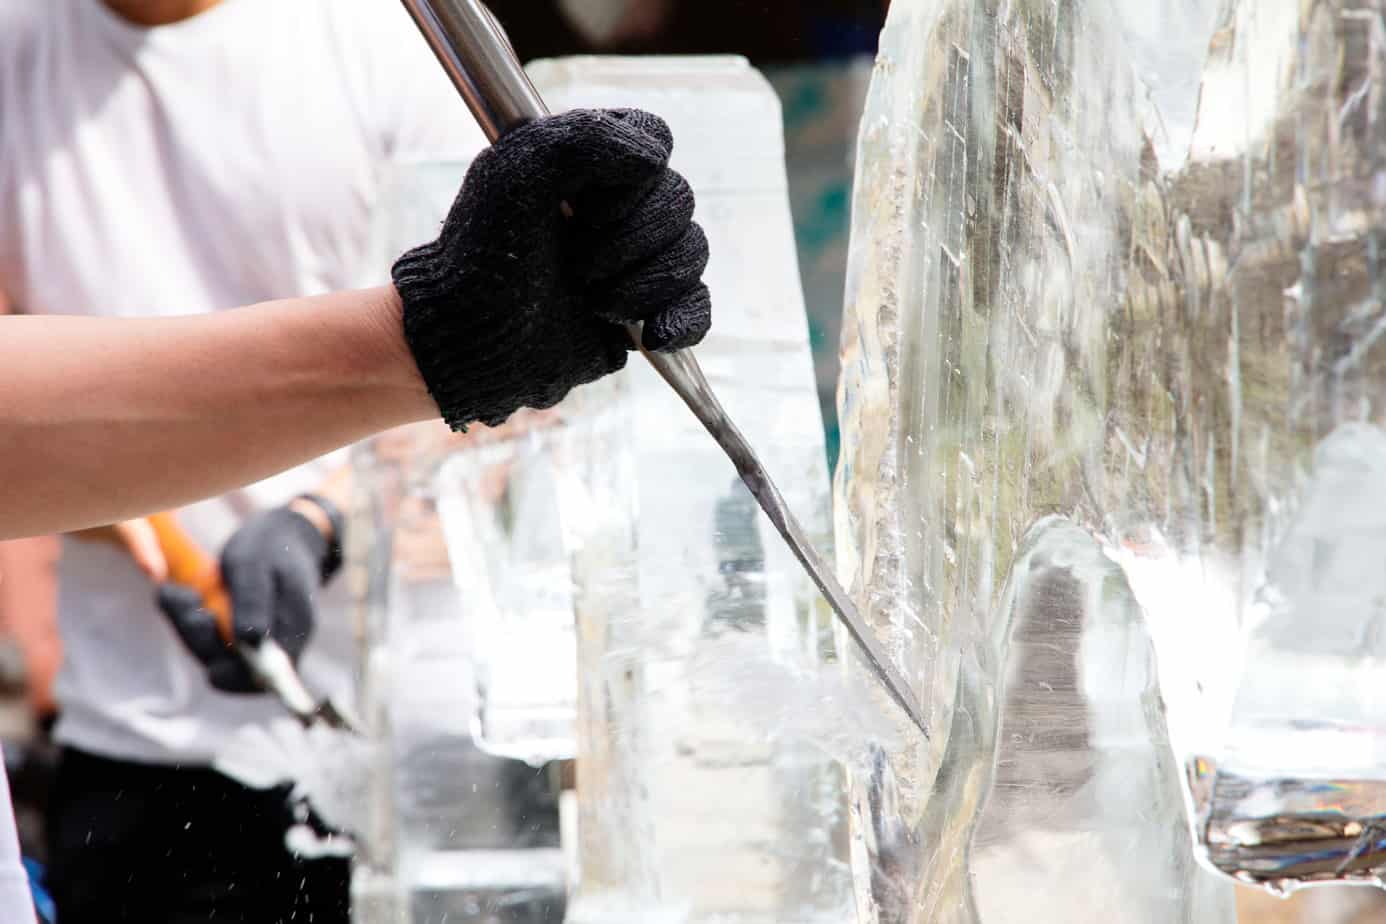 Handpicked: These Ice Molds Make Frozen Works of Art